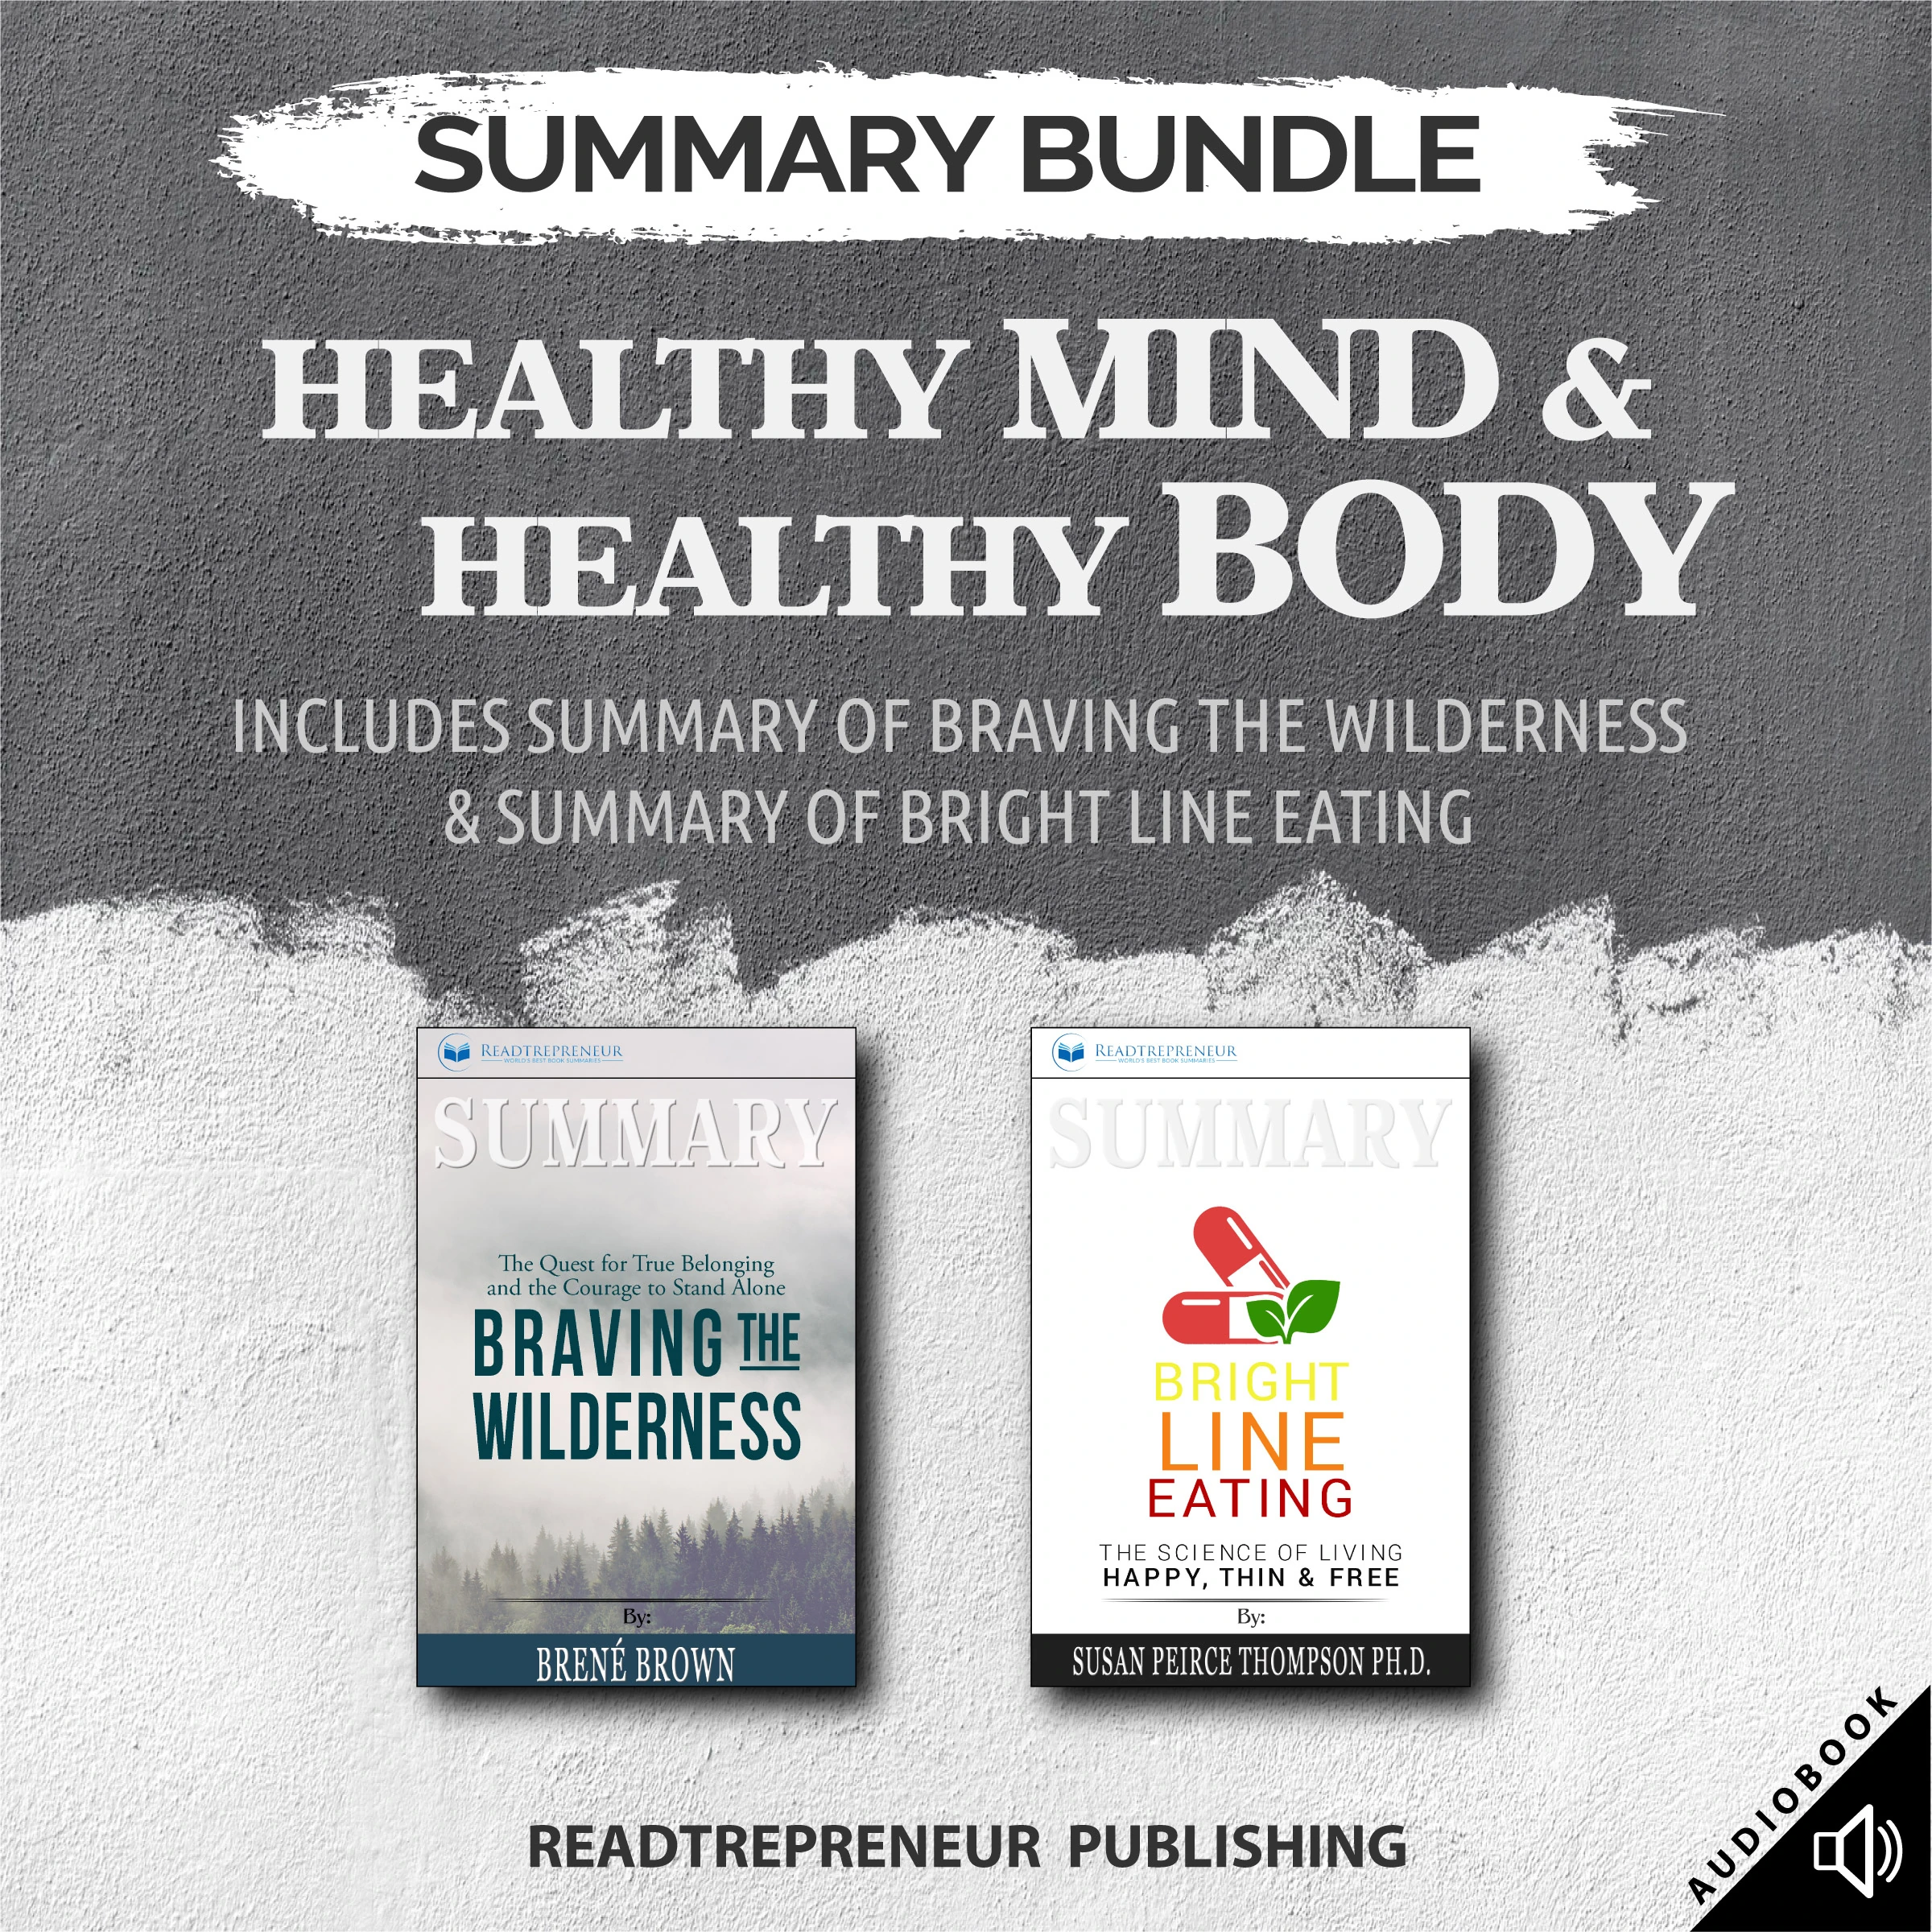 Summary Bundle: Healthy Mind & Healthy Body | Readtrepreneur Publishing: Includes Summary of Braving the Wilderness & Summary of Bright Line Eating Audiobook by Readtrepreneur Publishing